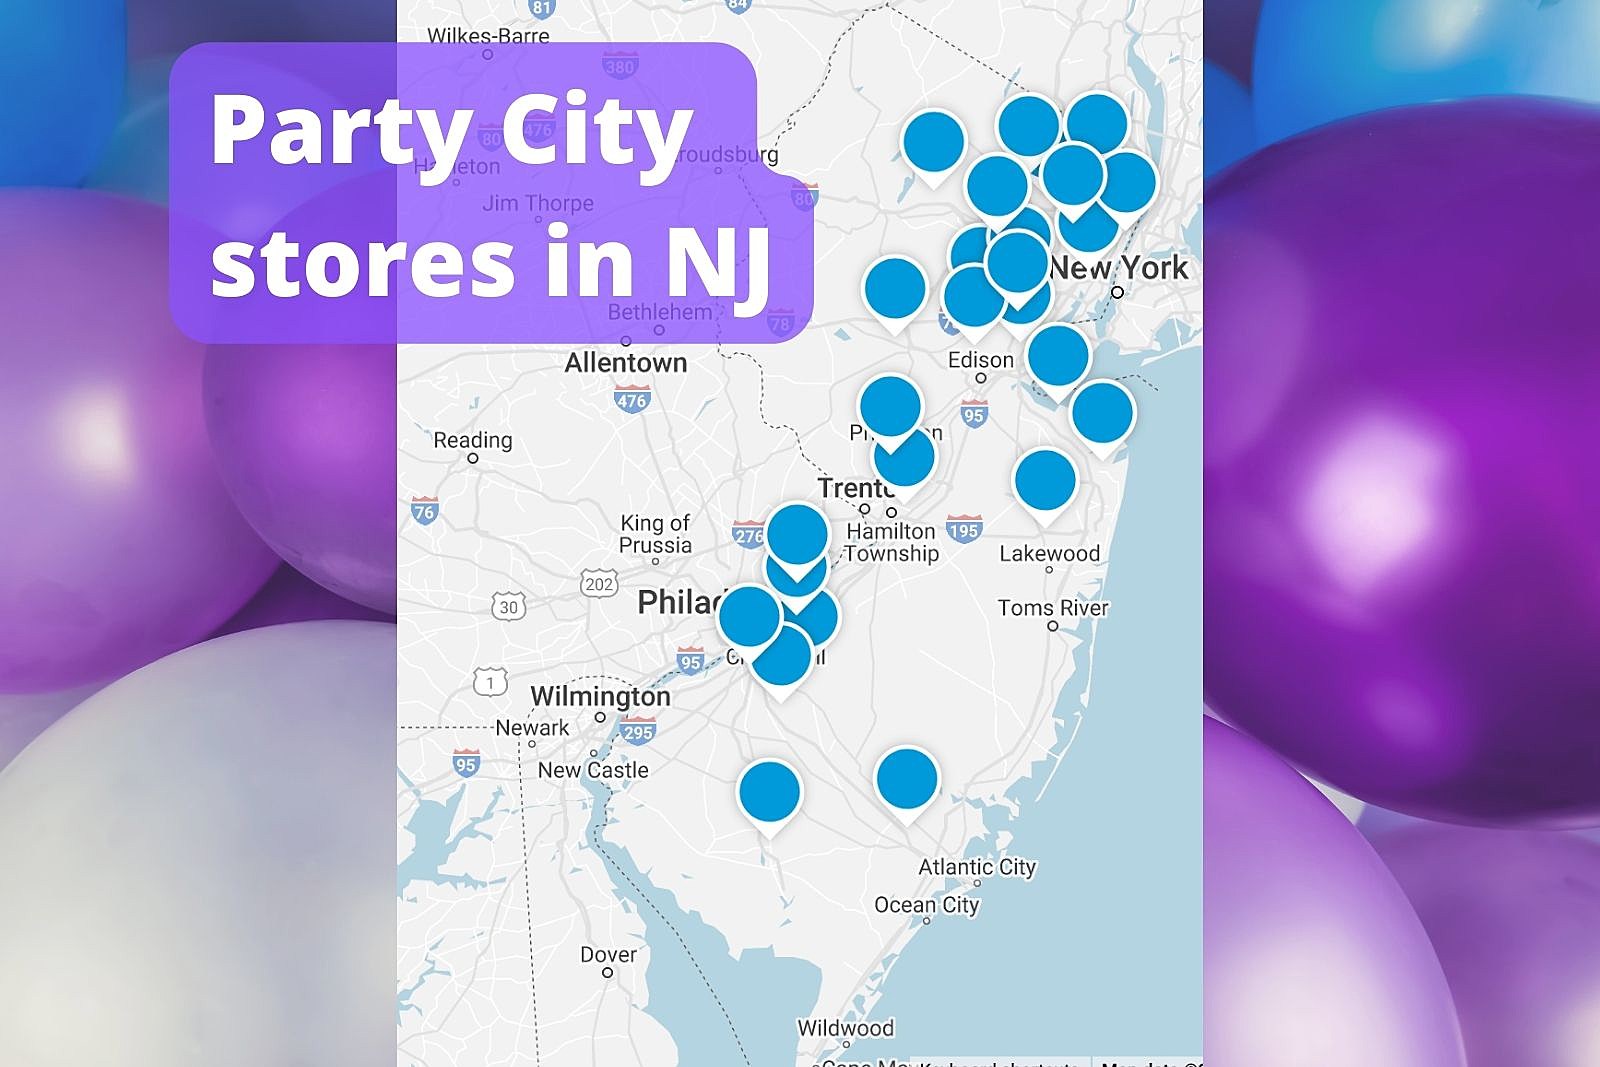 Party City files for bankruptcy protection, keeps NJ stores open